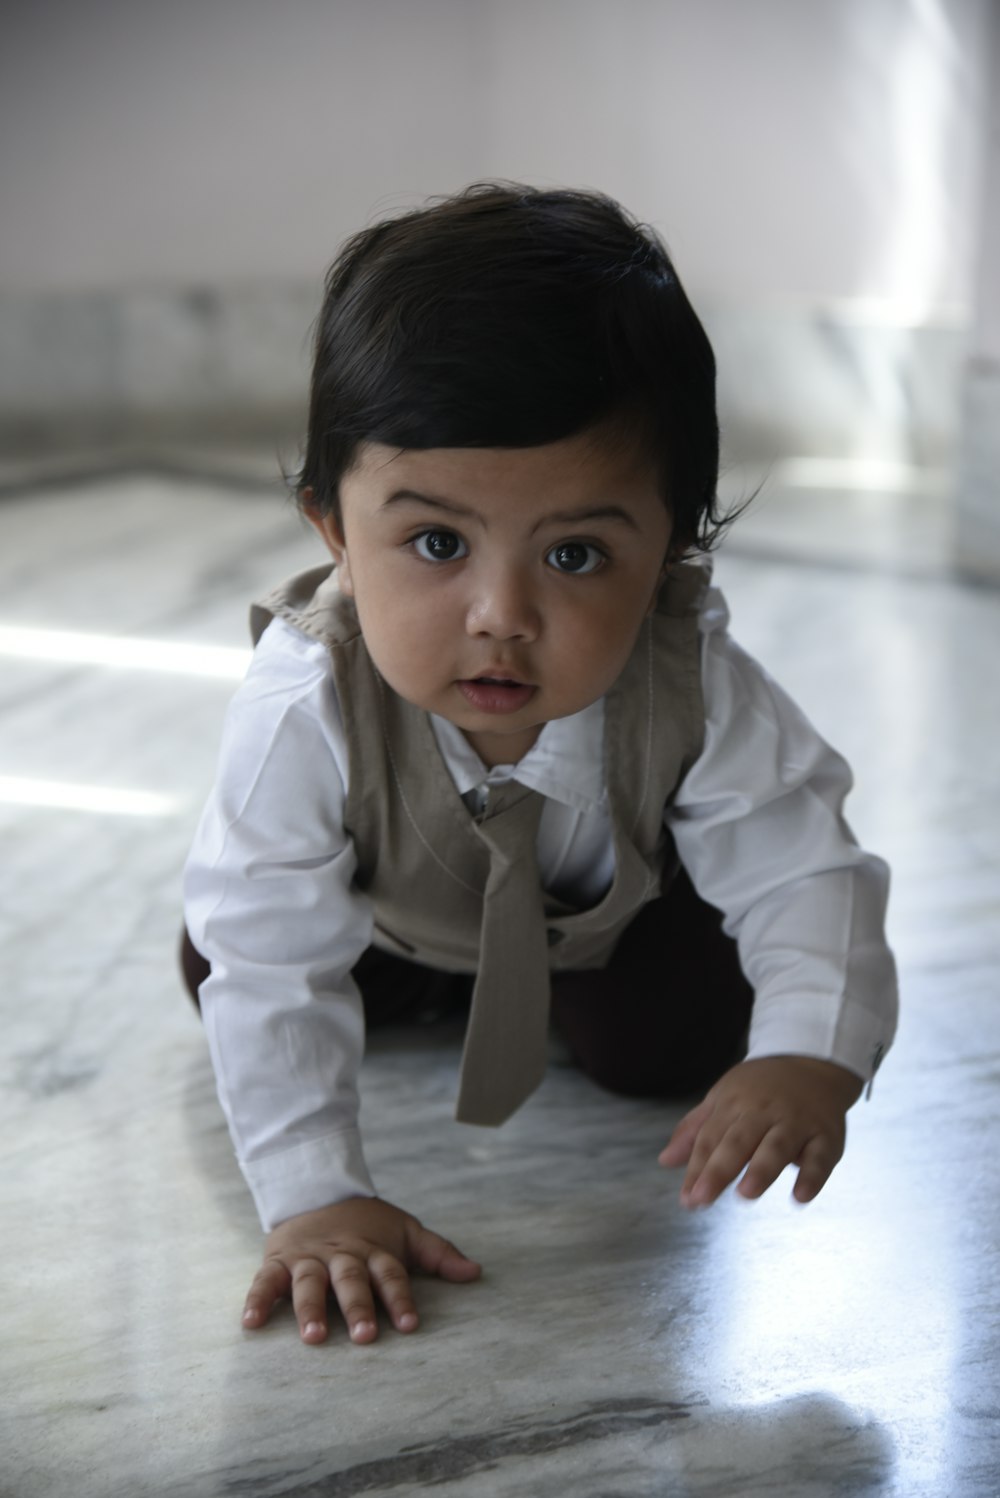 a baby wearing a tie crawling on the floor